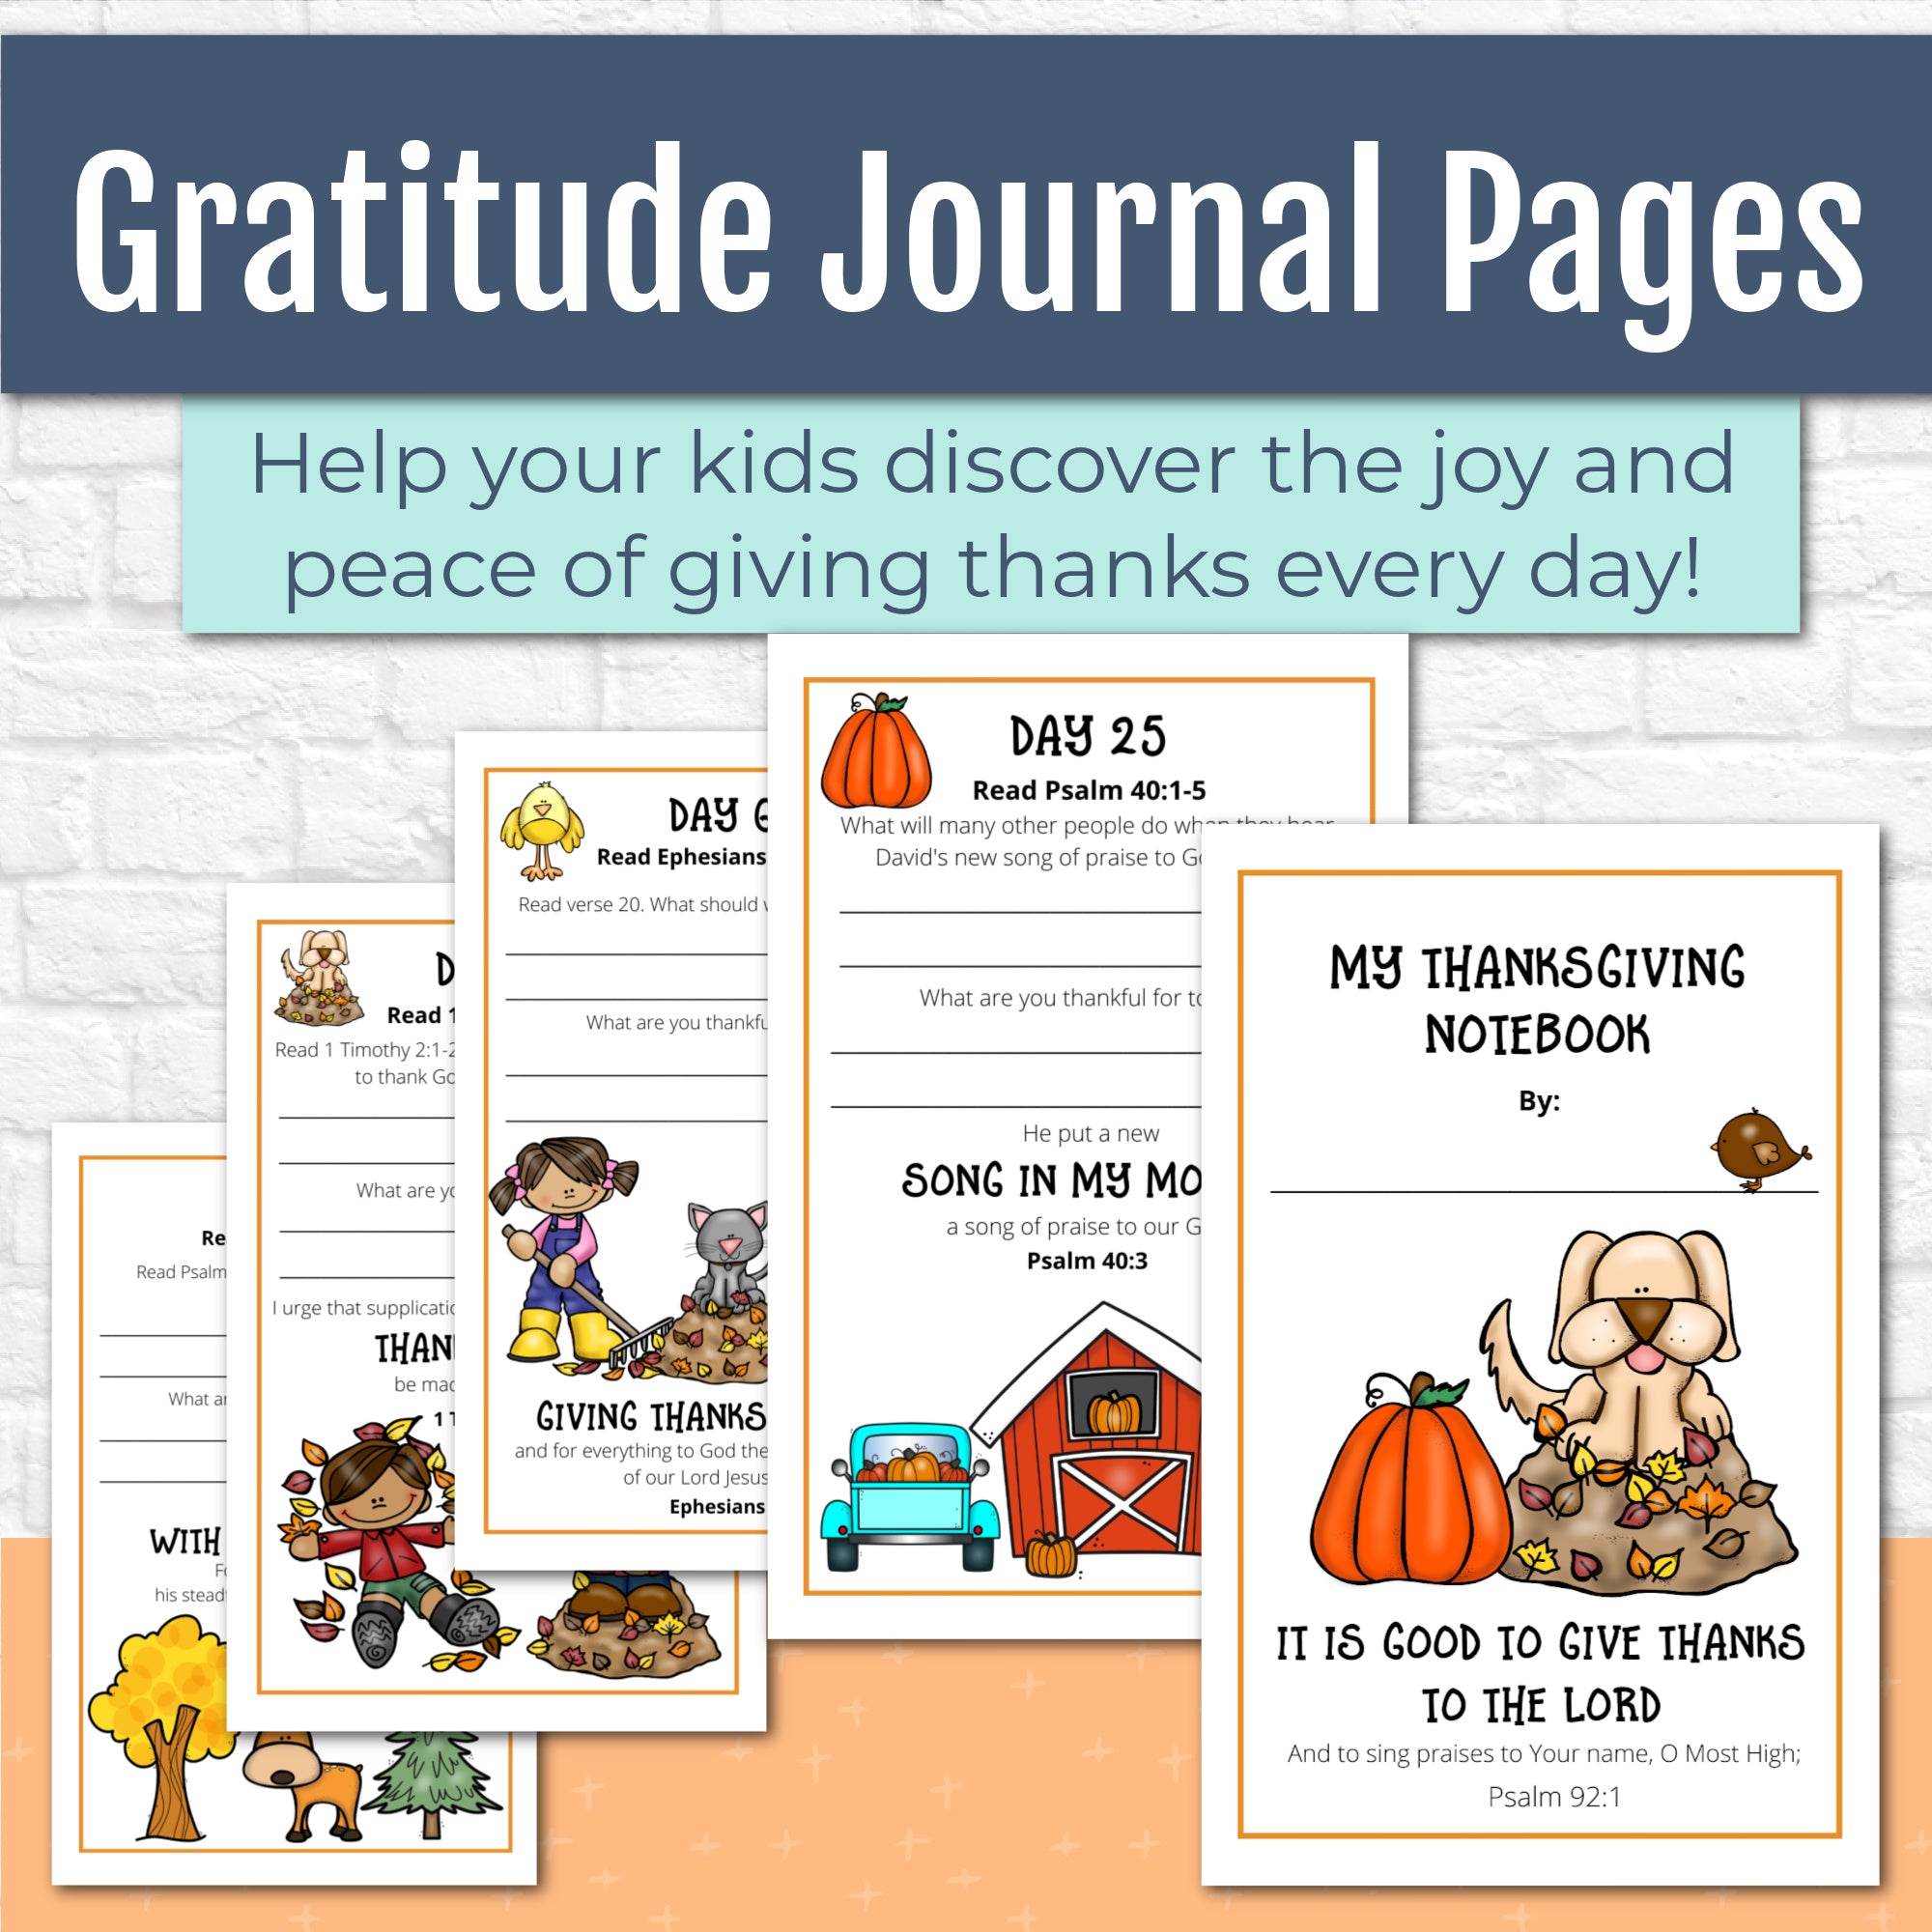 Gratitude Journal Pages with Thanksgiving Bible Verses, UNDATED Version